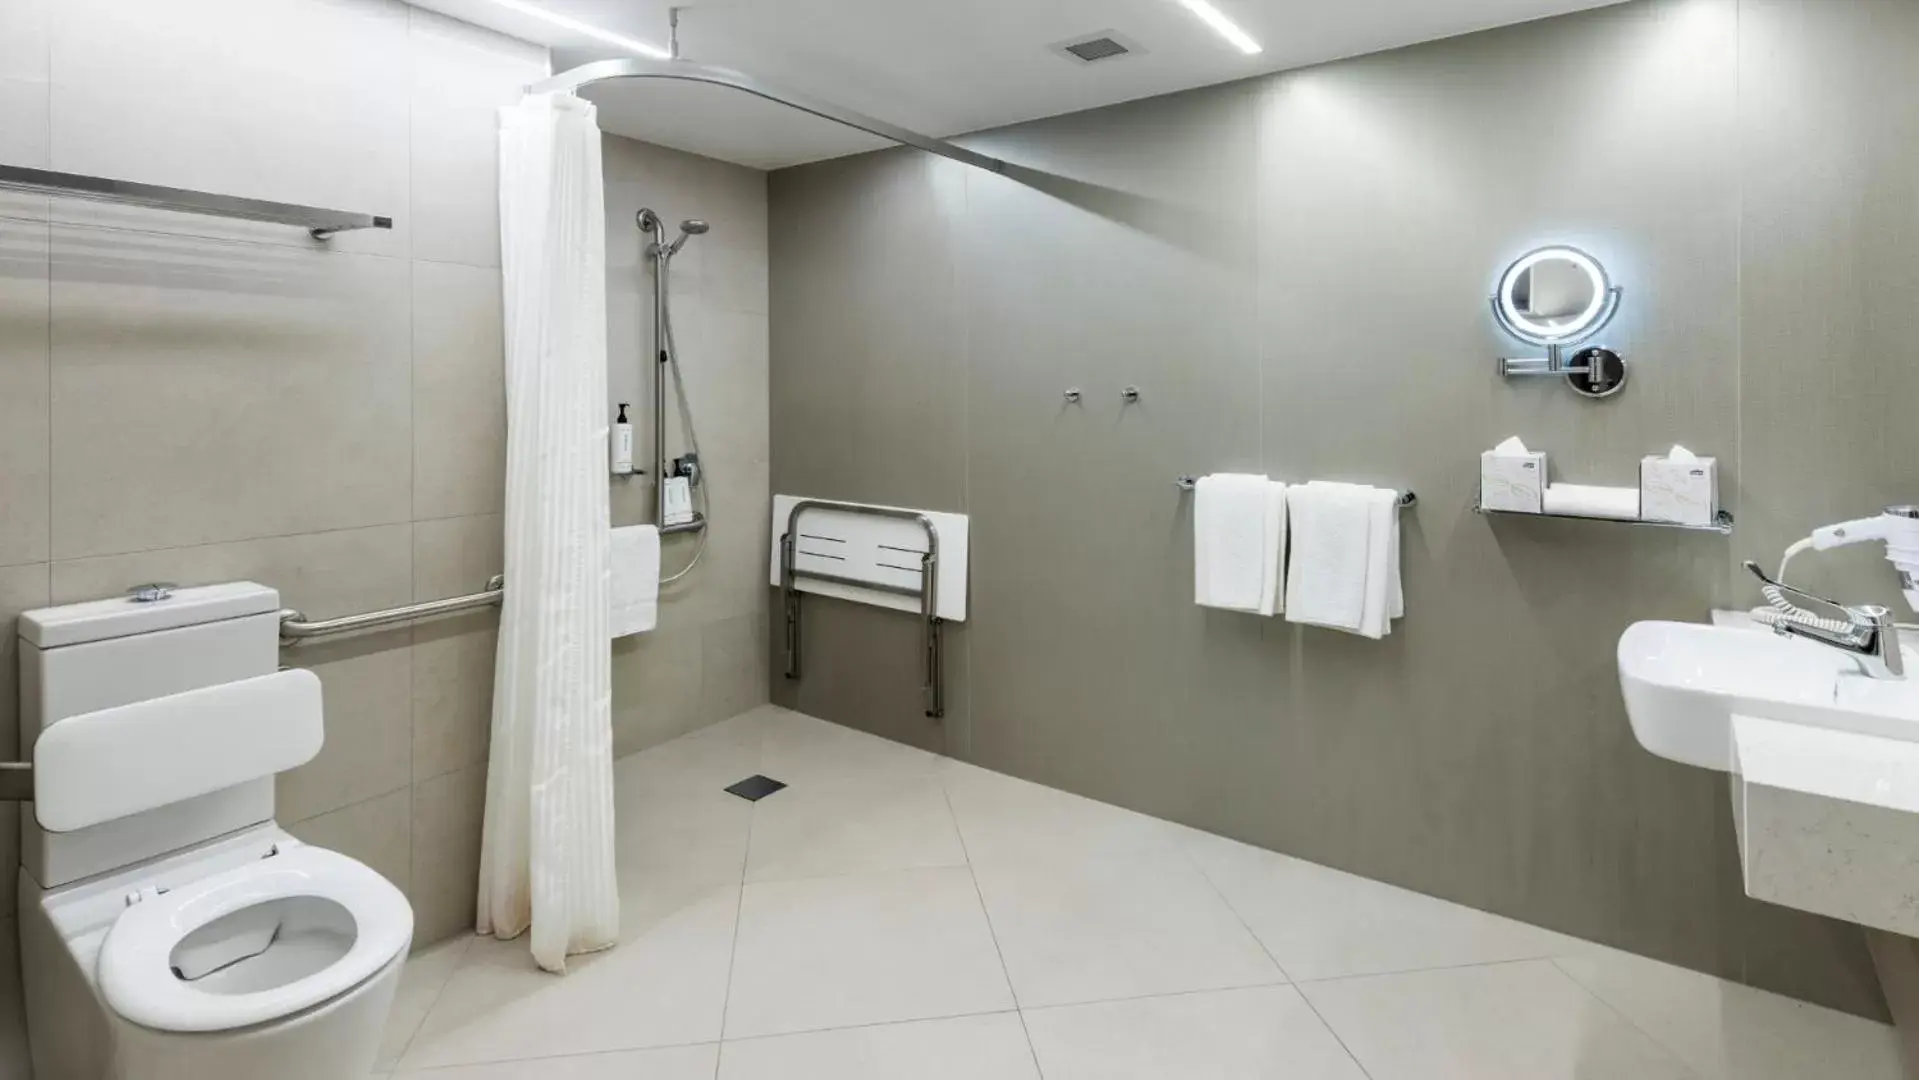 Facility for disabled guests, Bathroom in Pacific Hotel Cairns